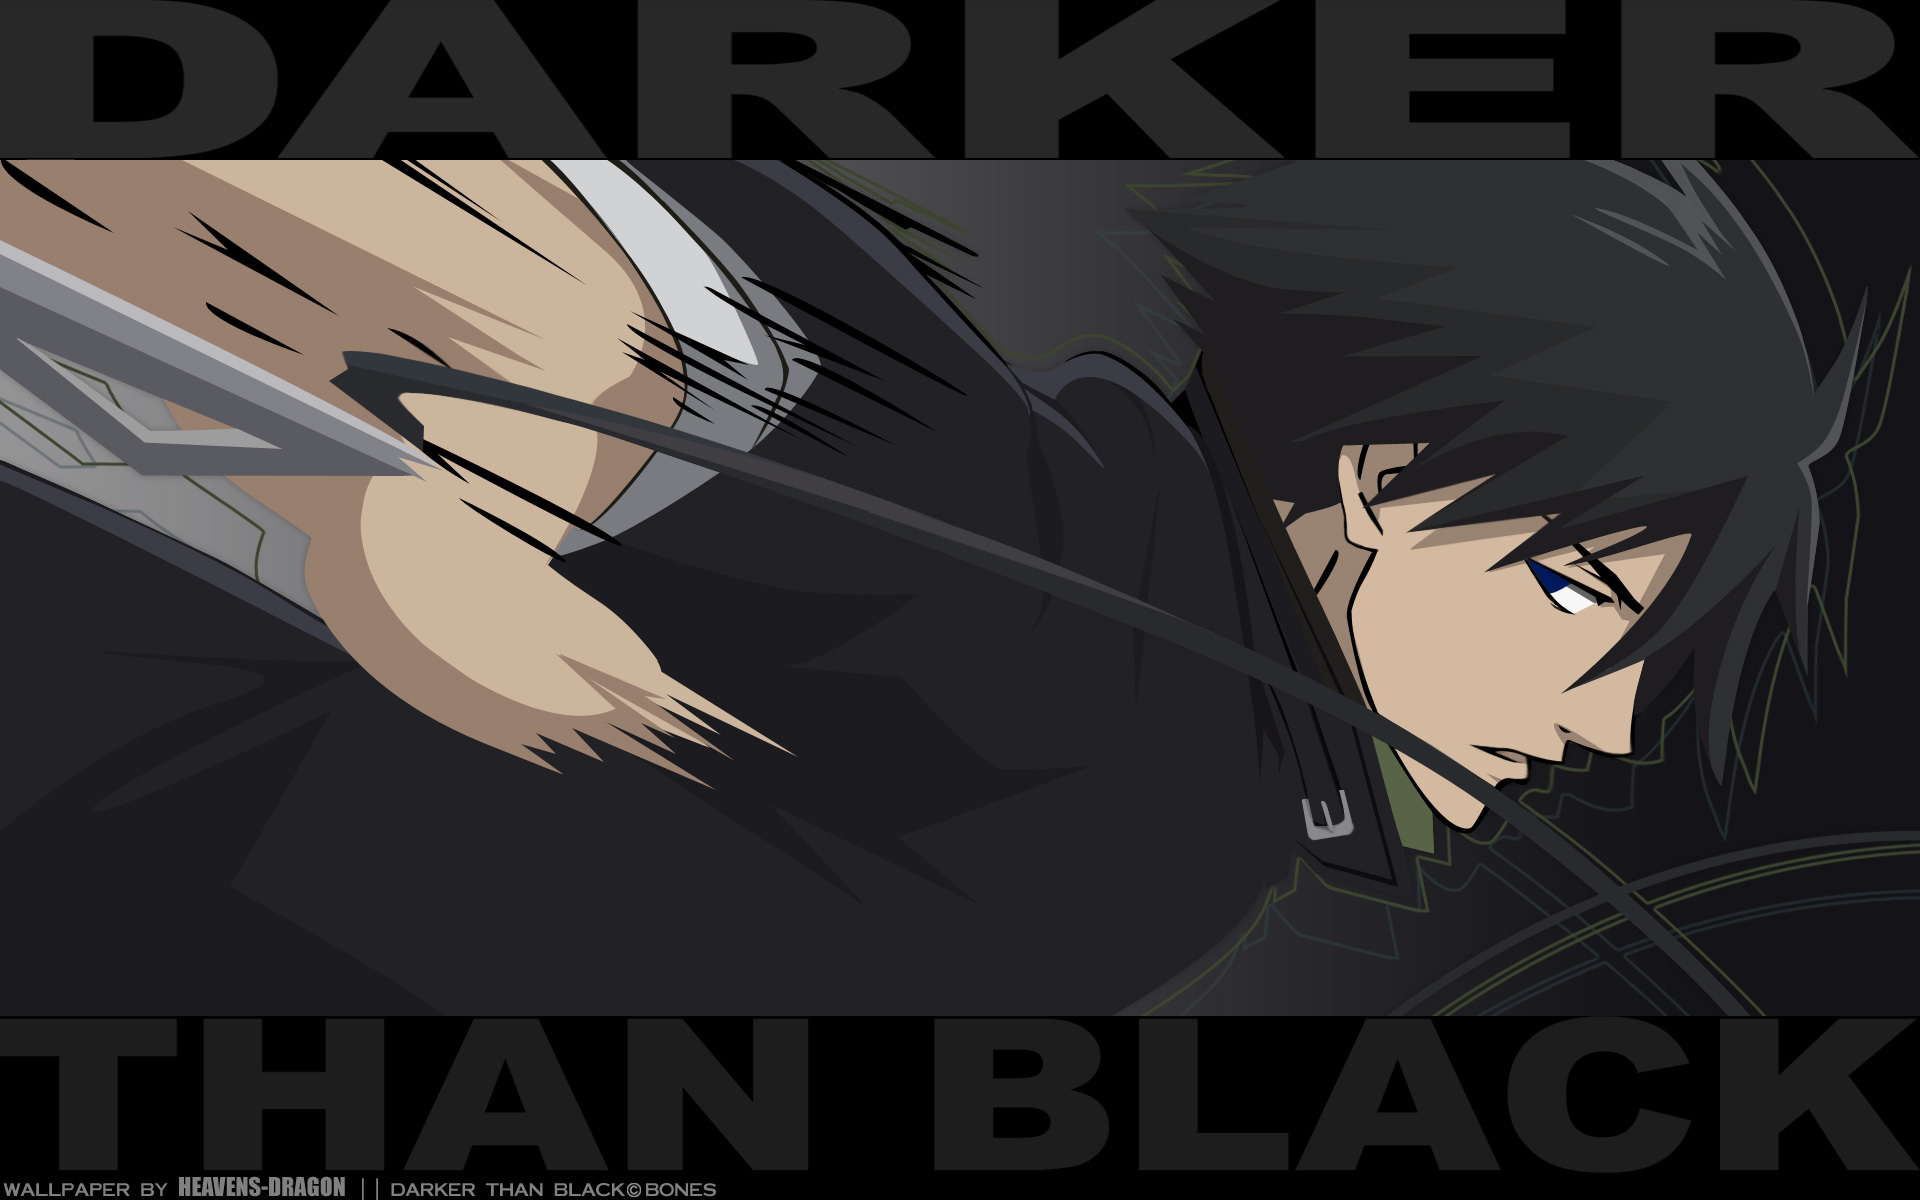 An artful portrayal of Hei from the anime Darker than Black exuding a mysterious aura in a dark backdrop.